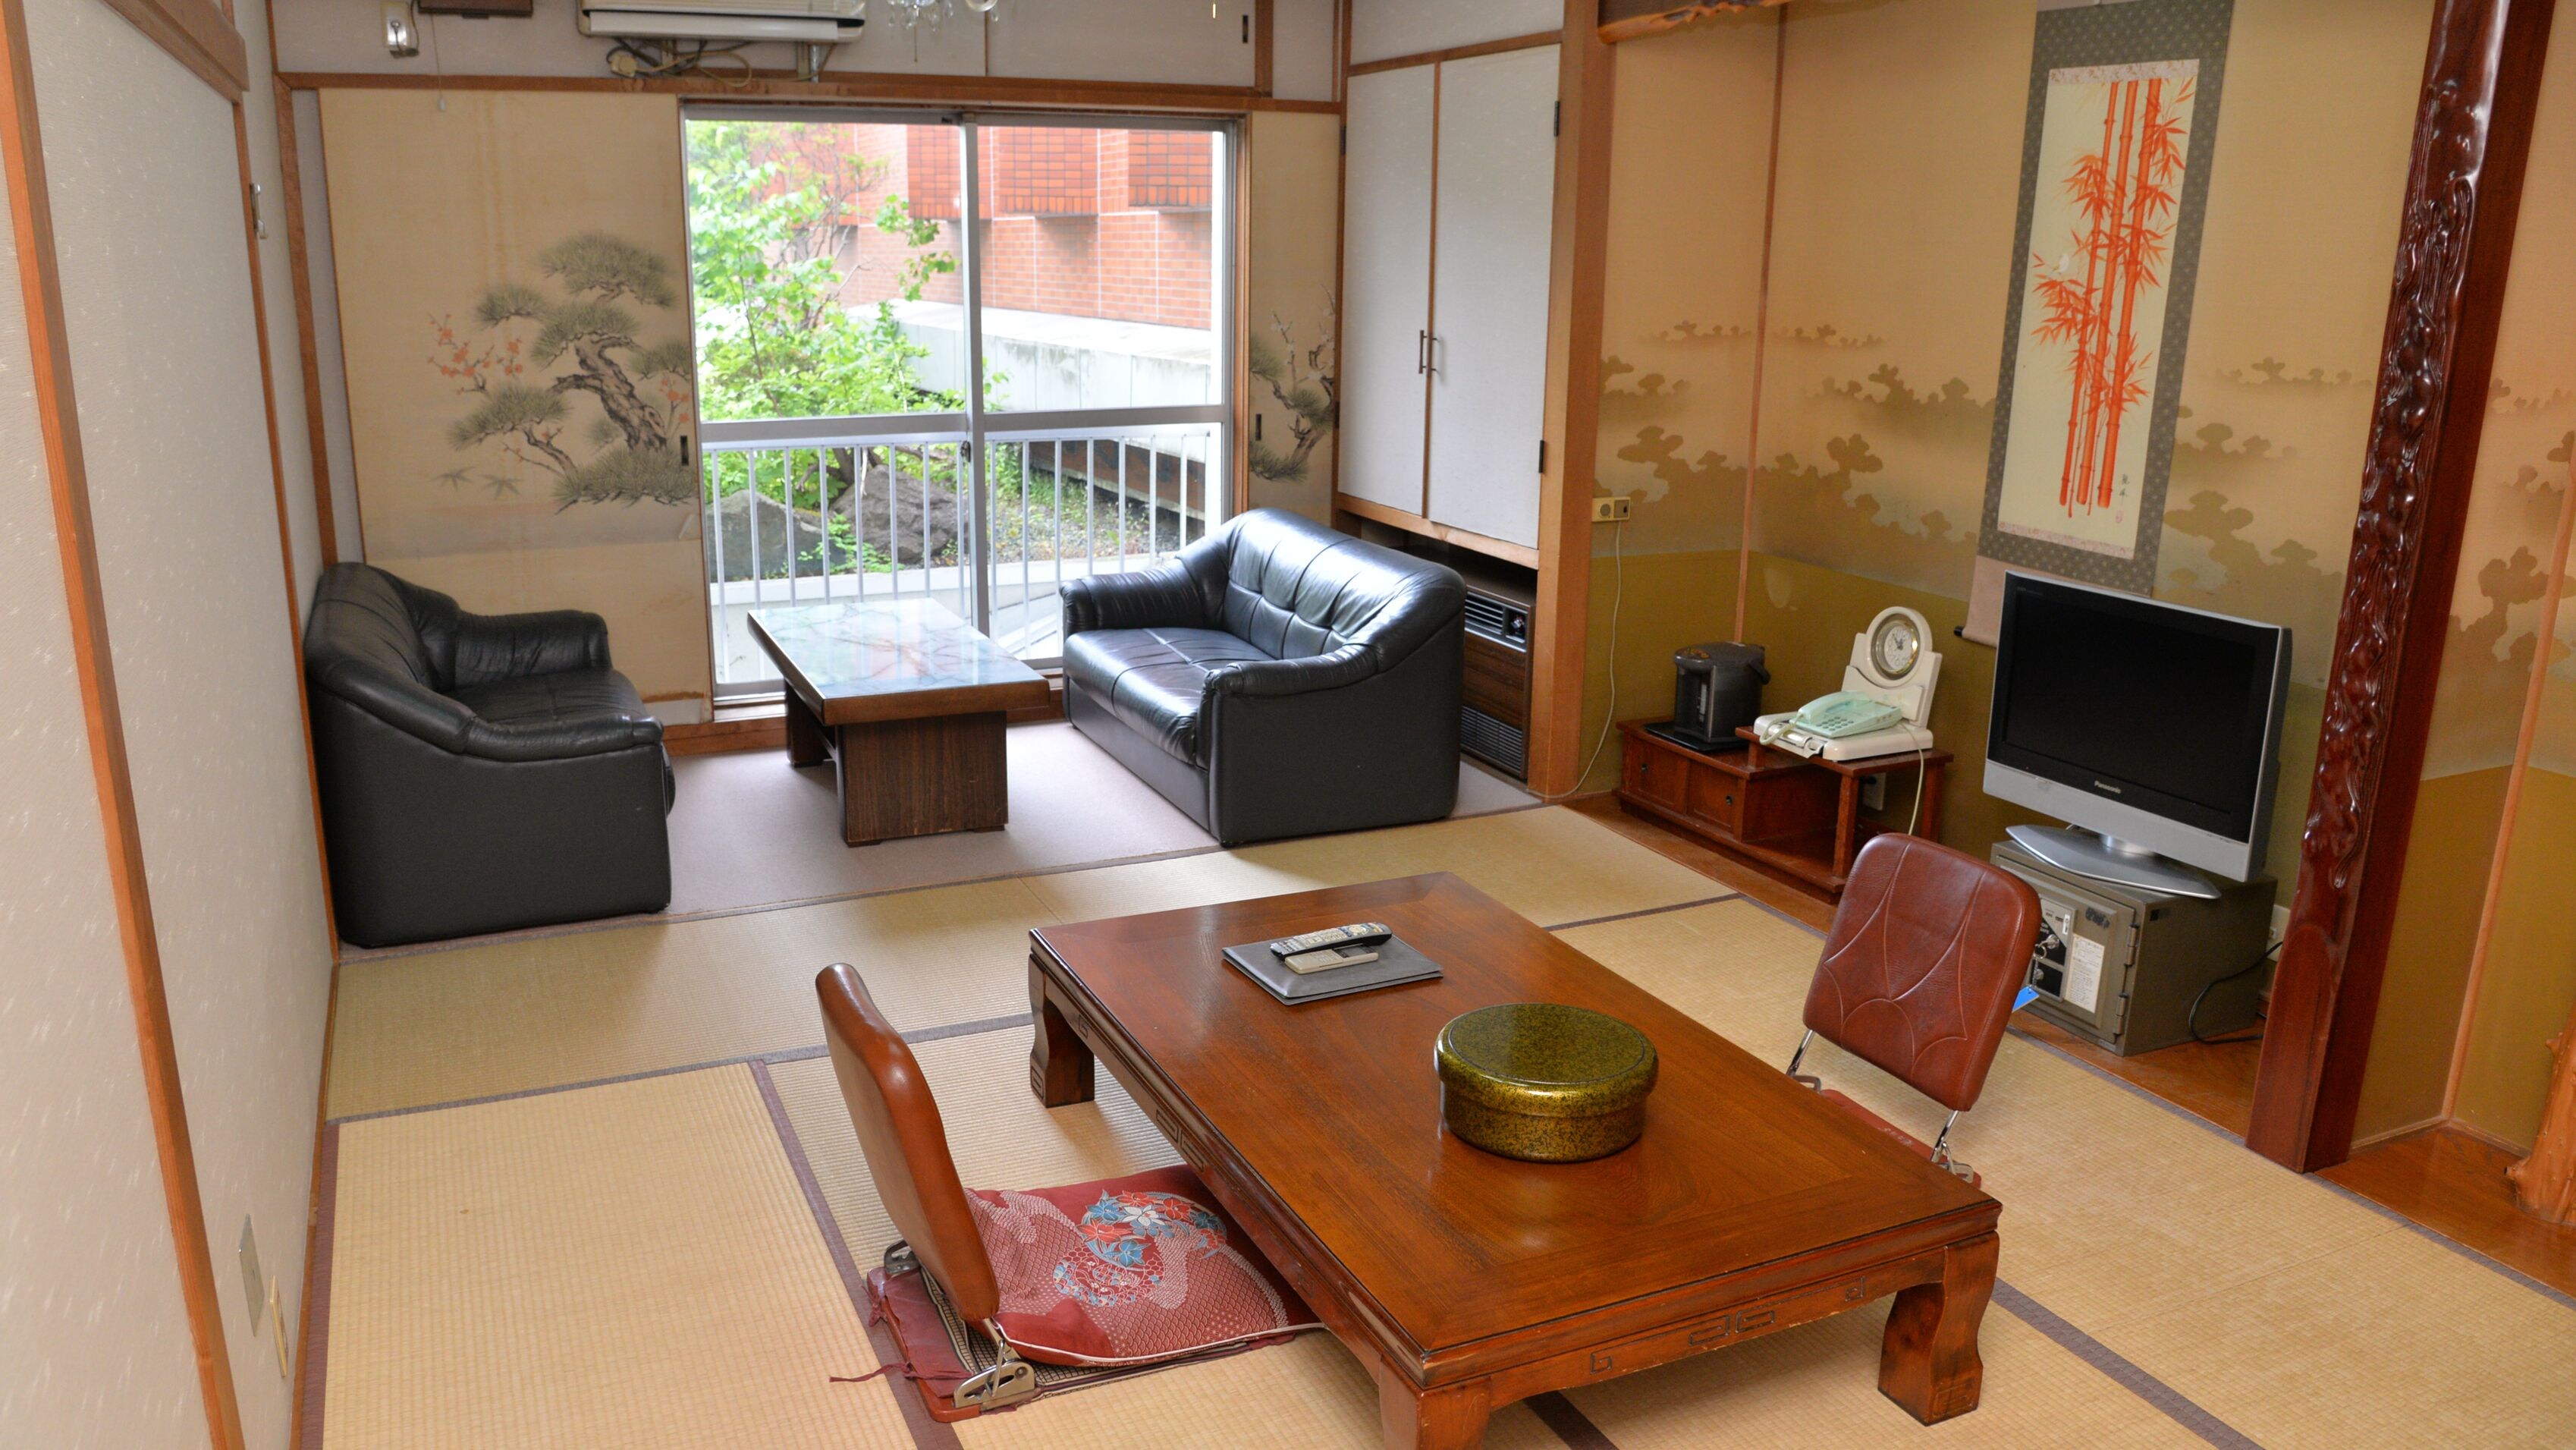 ◆ Annex Japanese-style room 8-12 tatami mats The spacious Japanese-style room seems to heal the tiredness of work and travel.